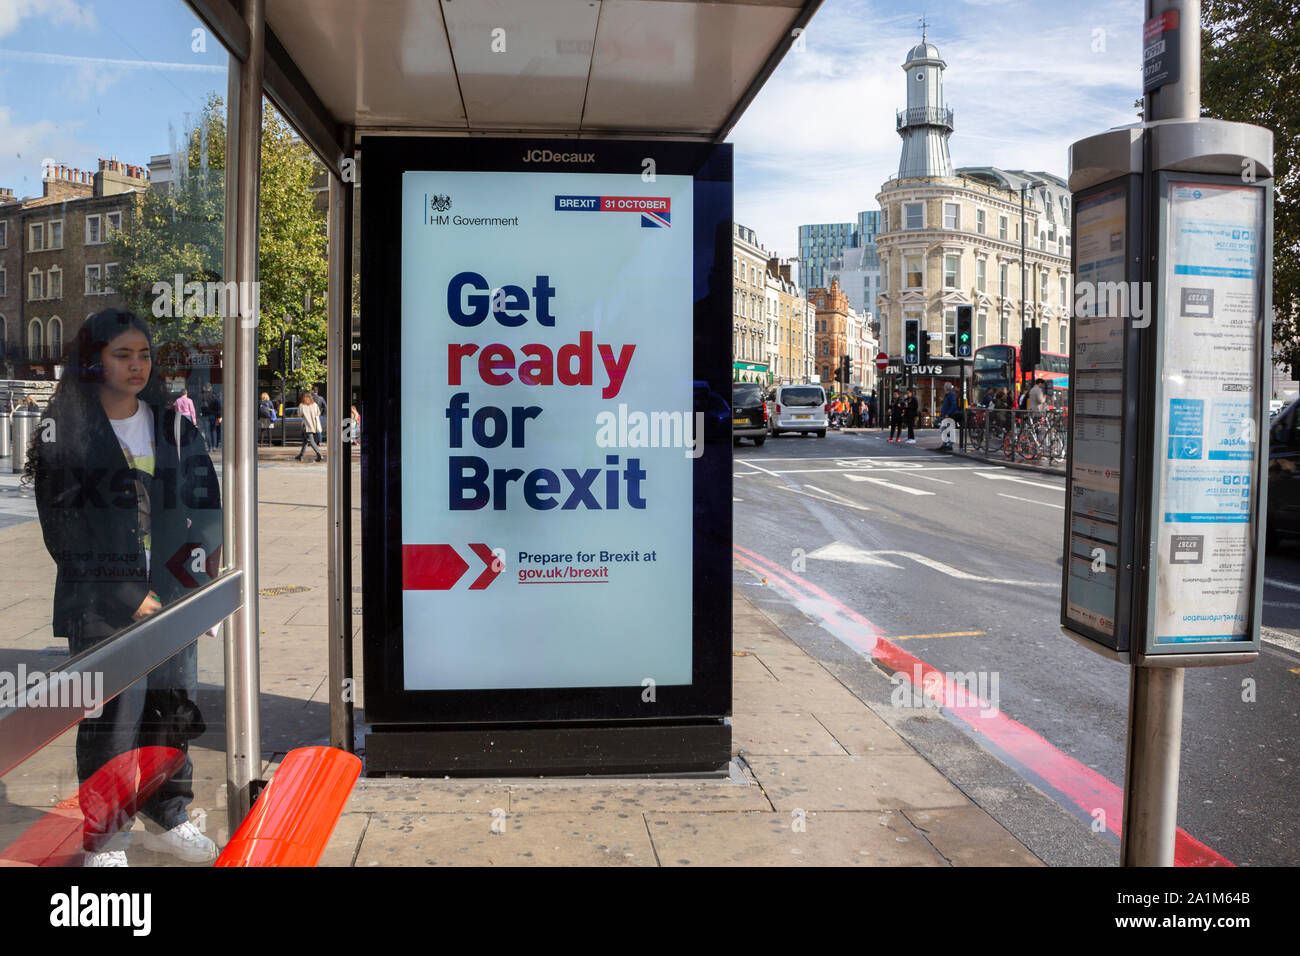 London UK. 27 September 2019. Get ready for Brexit HM Government advertising on bus shelters. Stock Photo